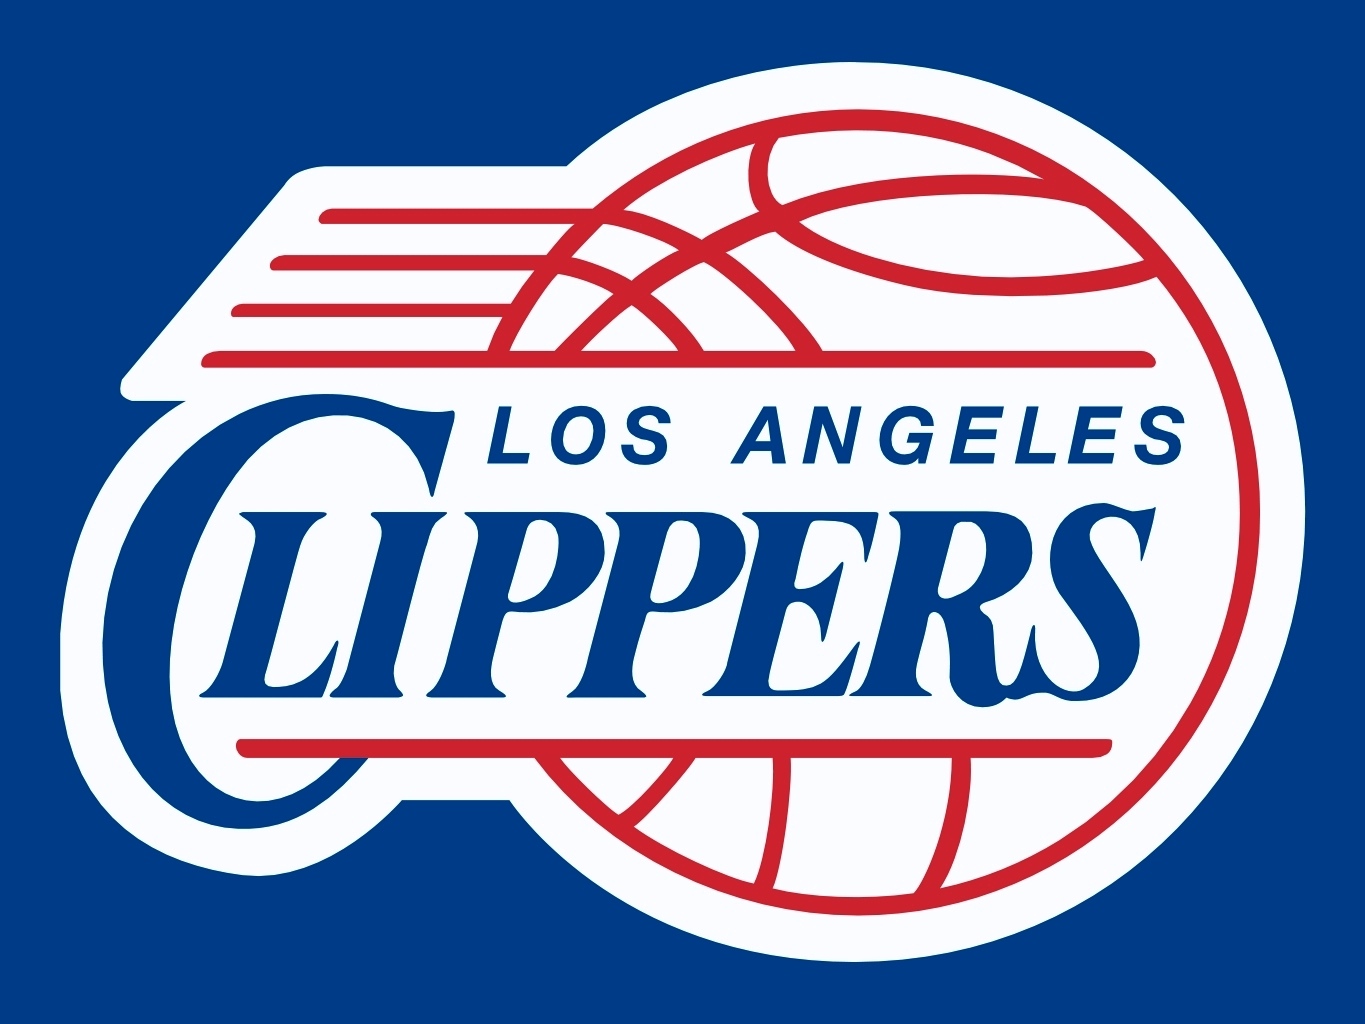 Los Angeles Clippers Backgrounds, Compatible - PC, Mobile, Gadgets| 1365x1024 px